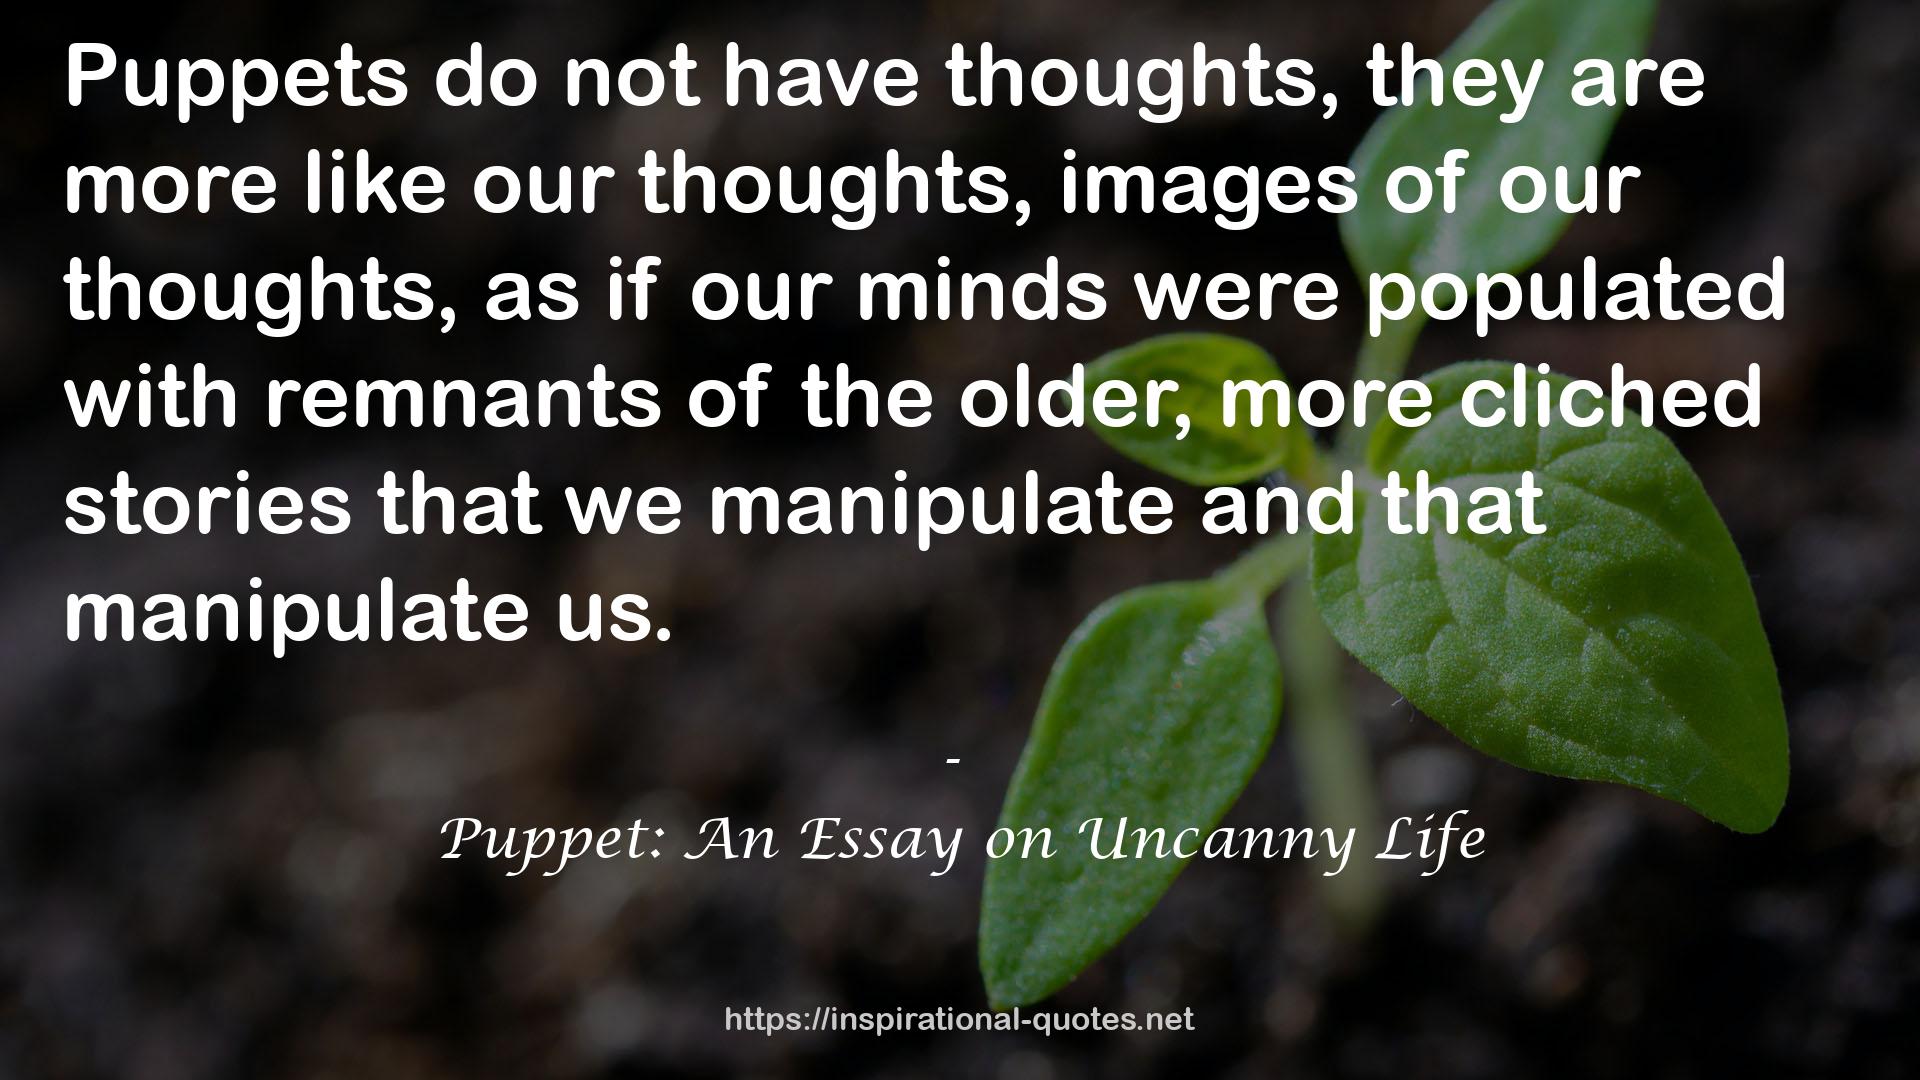 Puppet: An Essay on Uncanny Life QUOTES